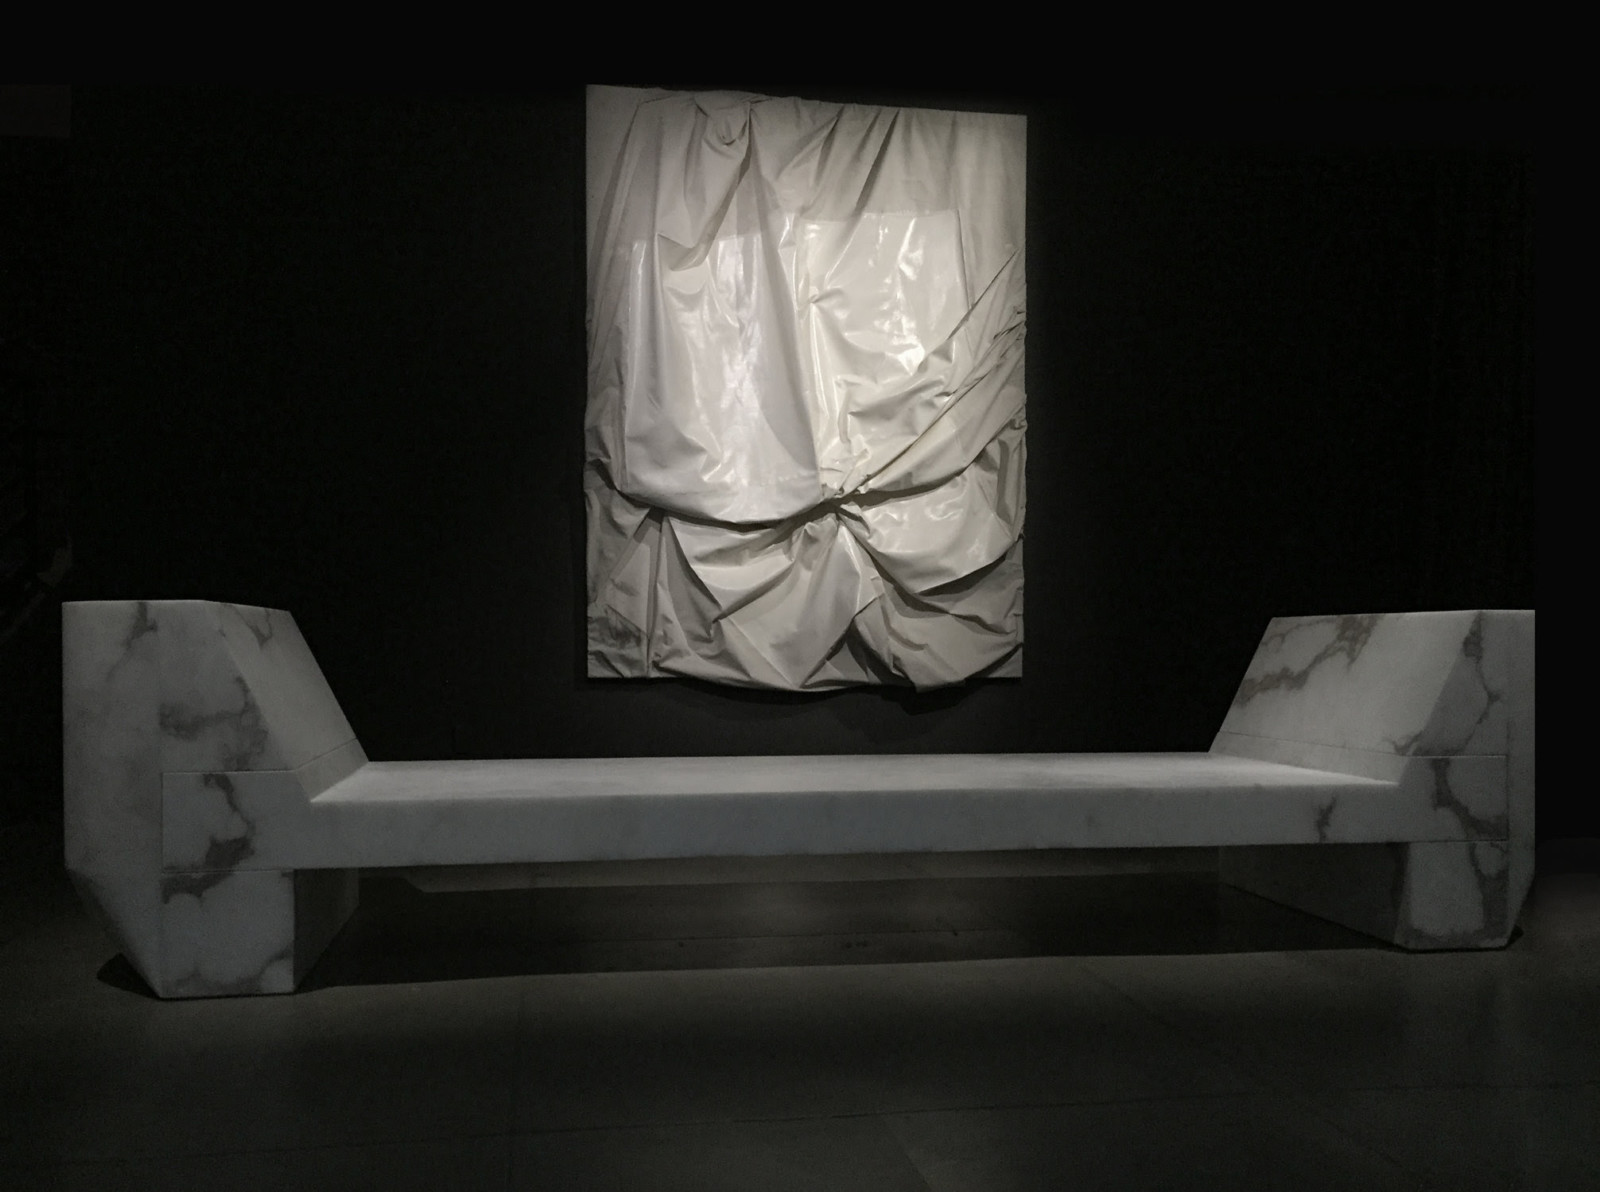 Rick Owens’ furniture collection – The birth of brutalism